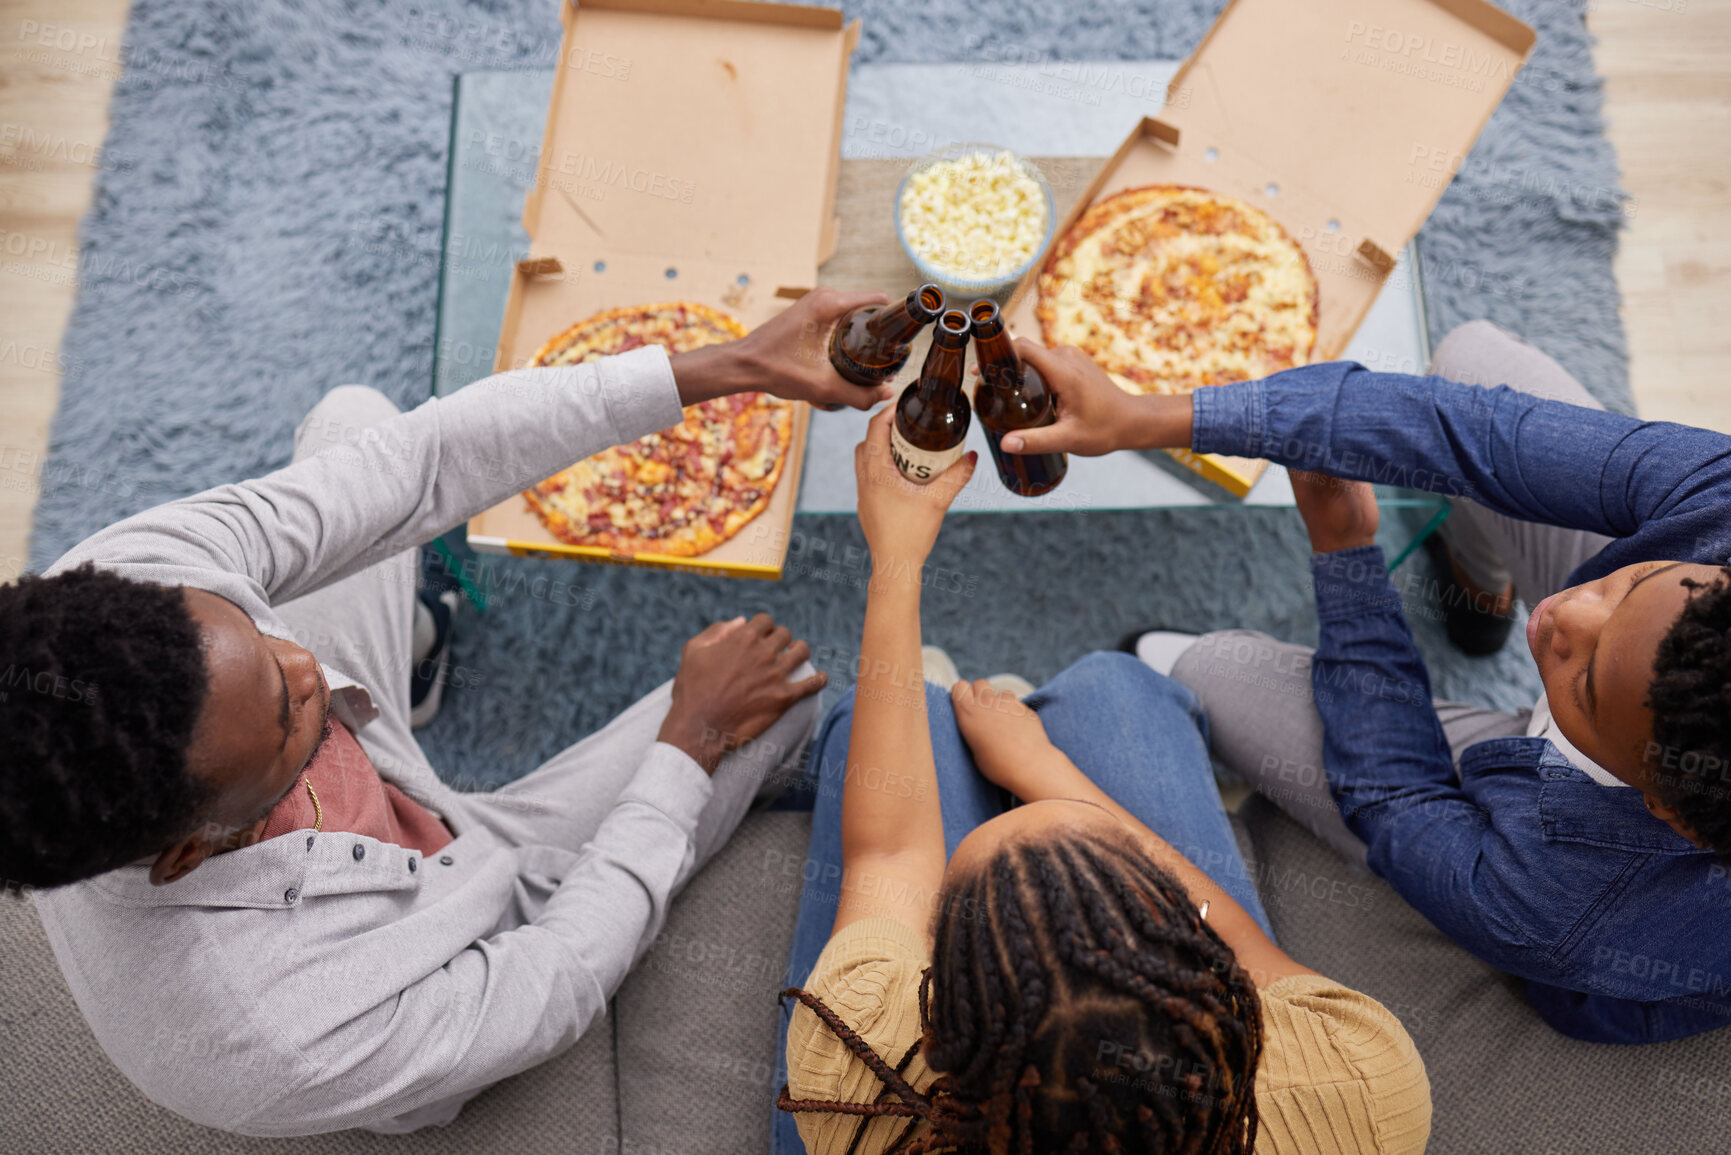 Buy stock photo Cheers, beer and above of people with pizza, lunch celebration and relax together in a house. Happy, dinner and friends toasting with alcohol and food on the living room sofa to celebrate eating